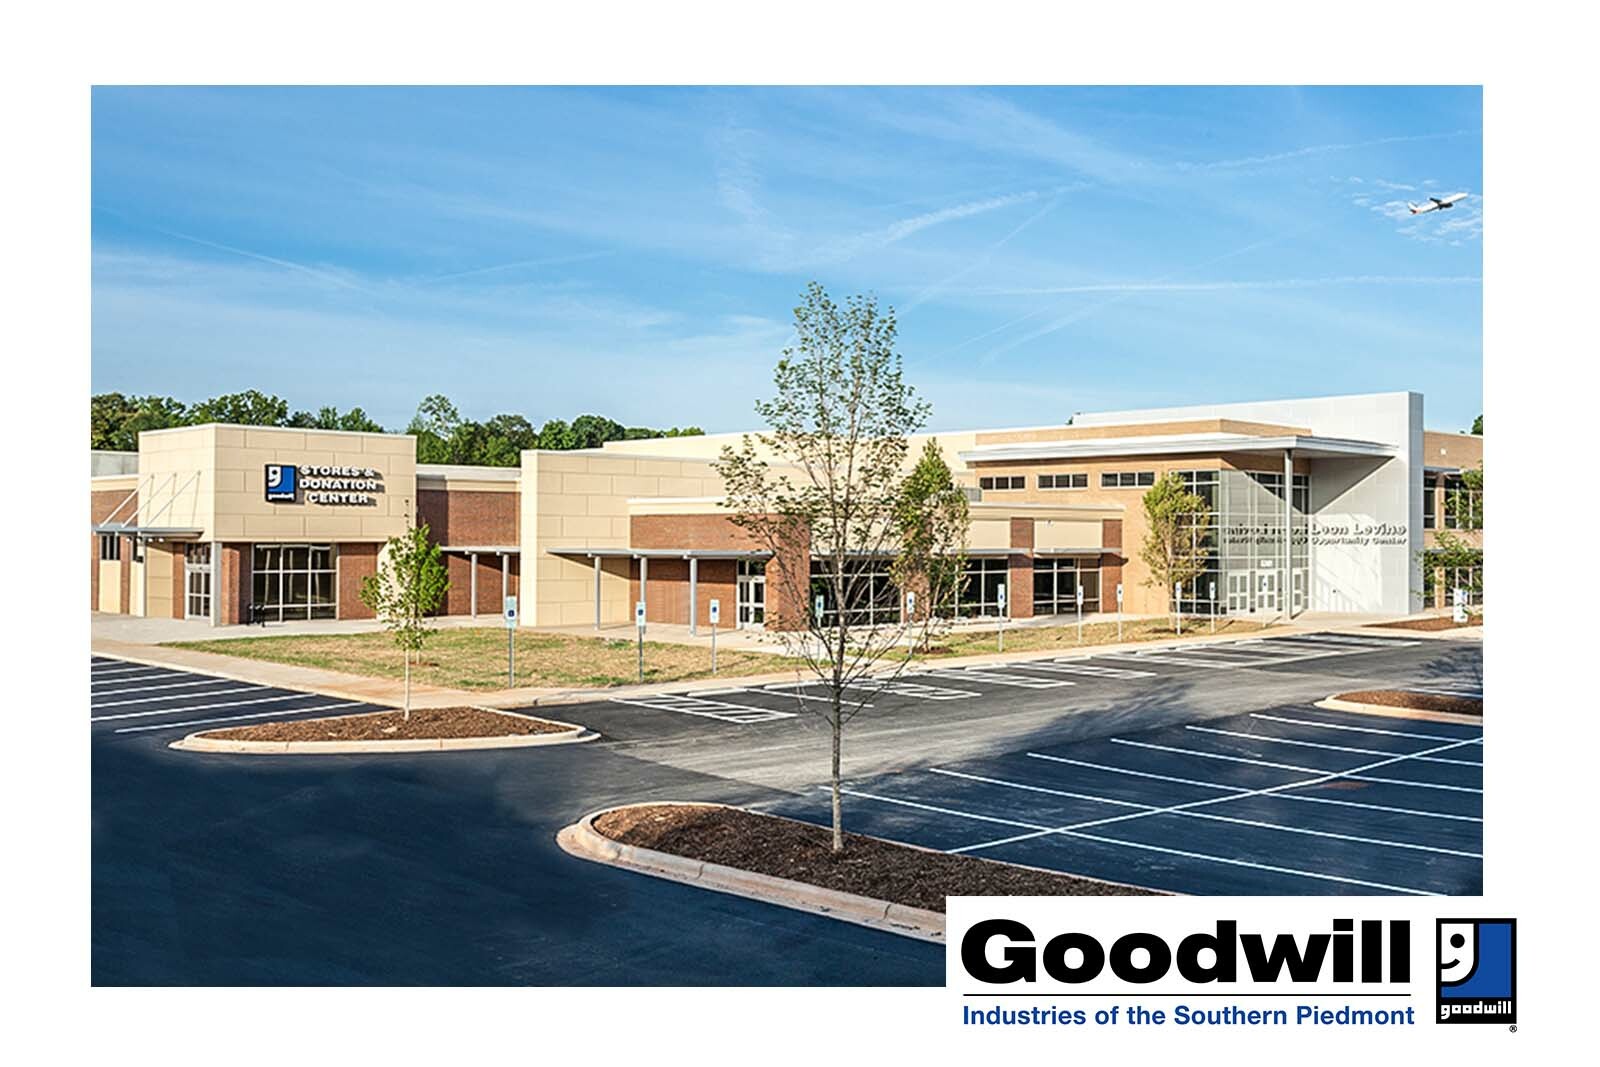 exterior photo of Goodwill University campus and goodwill logo